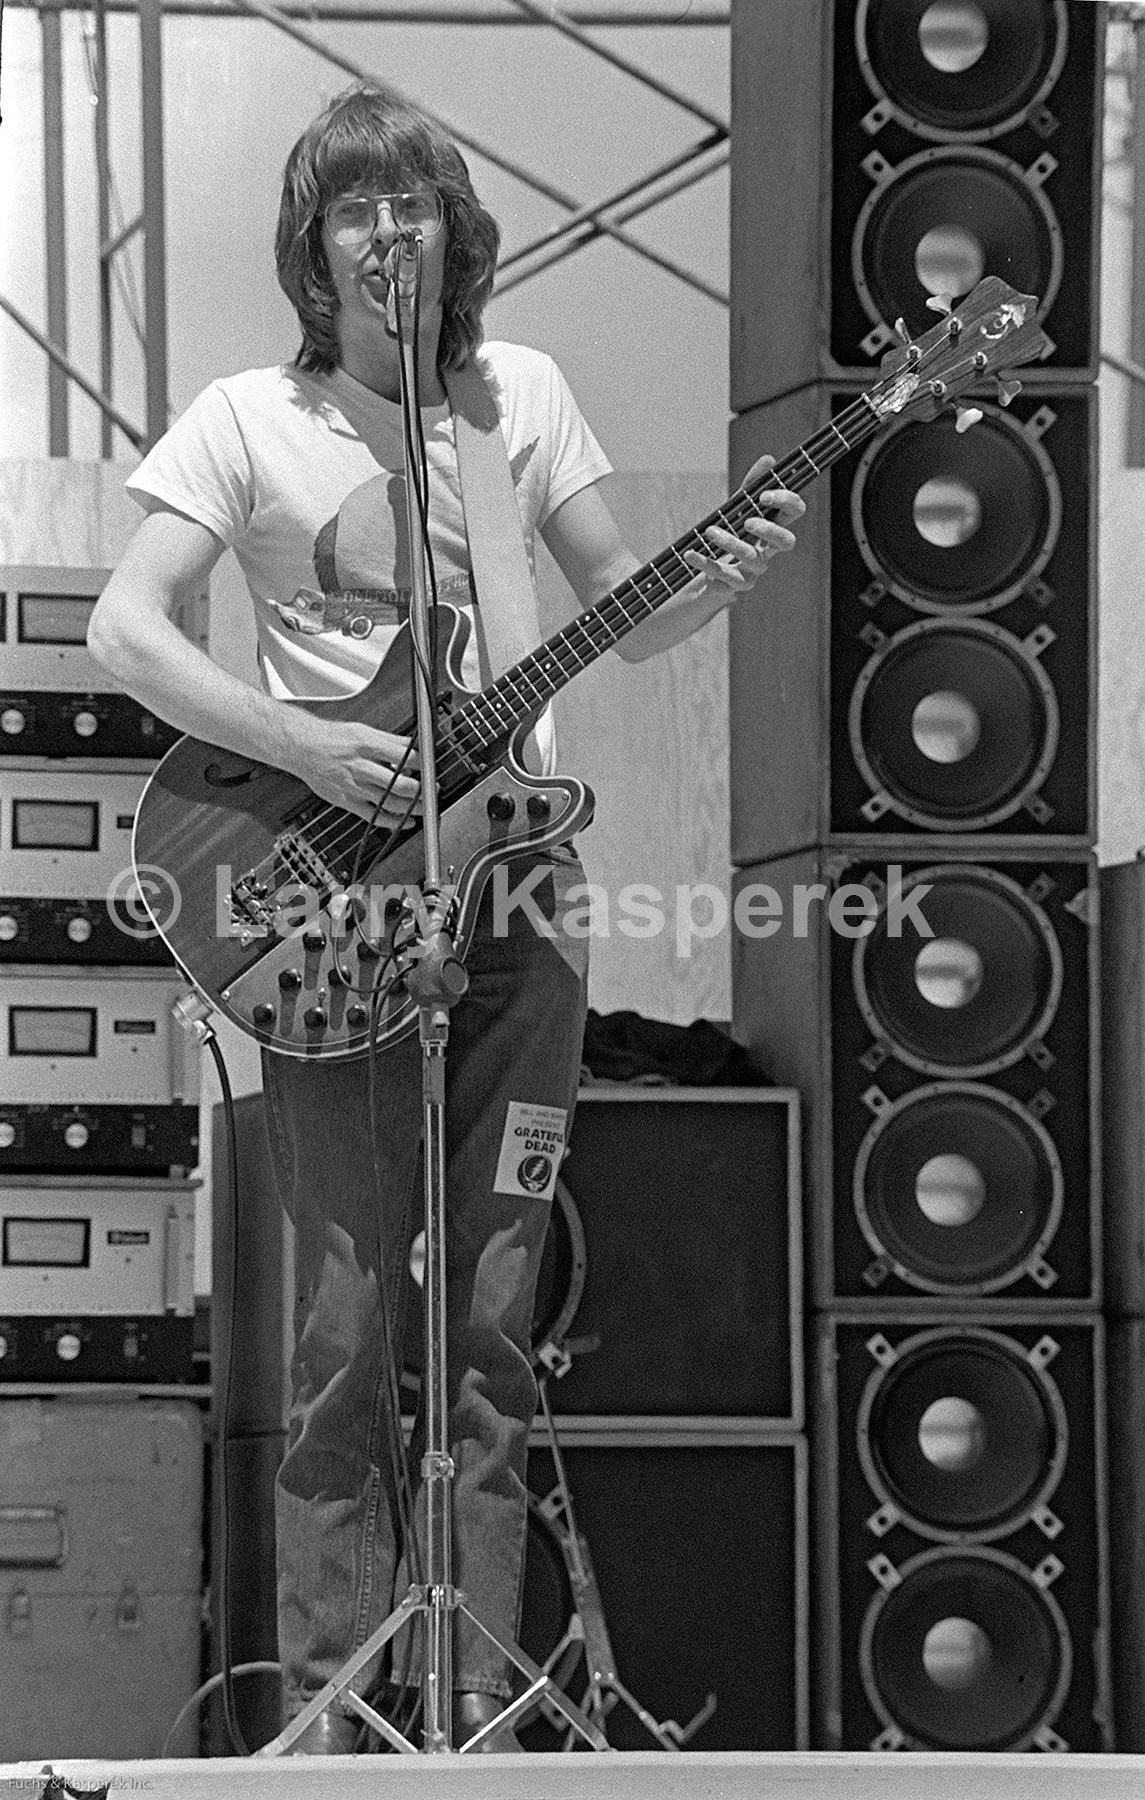  Des Moines, IA State Fairgrounds May 5, 1973 